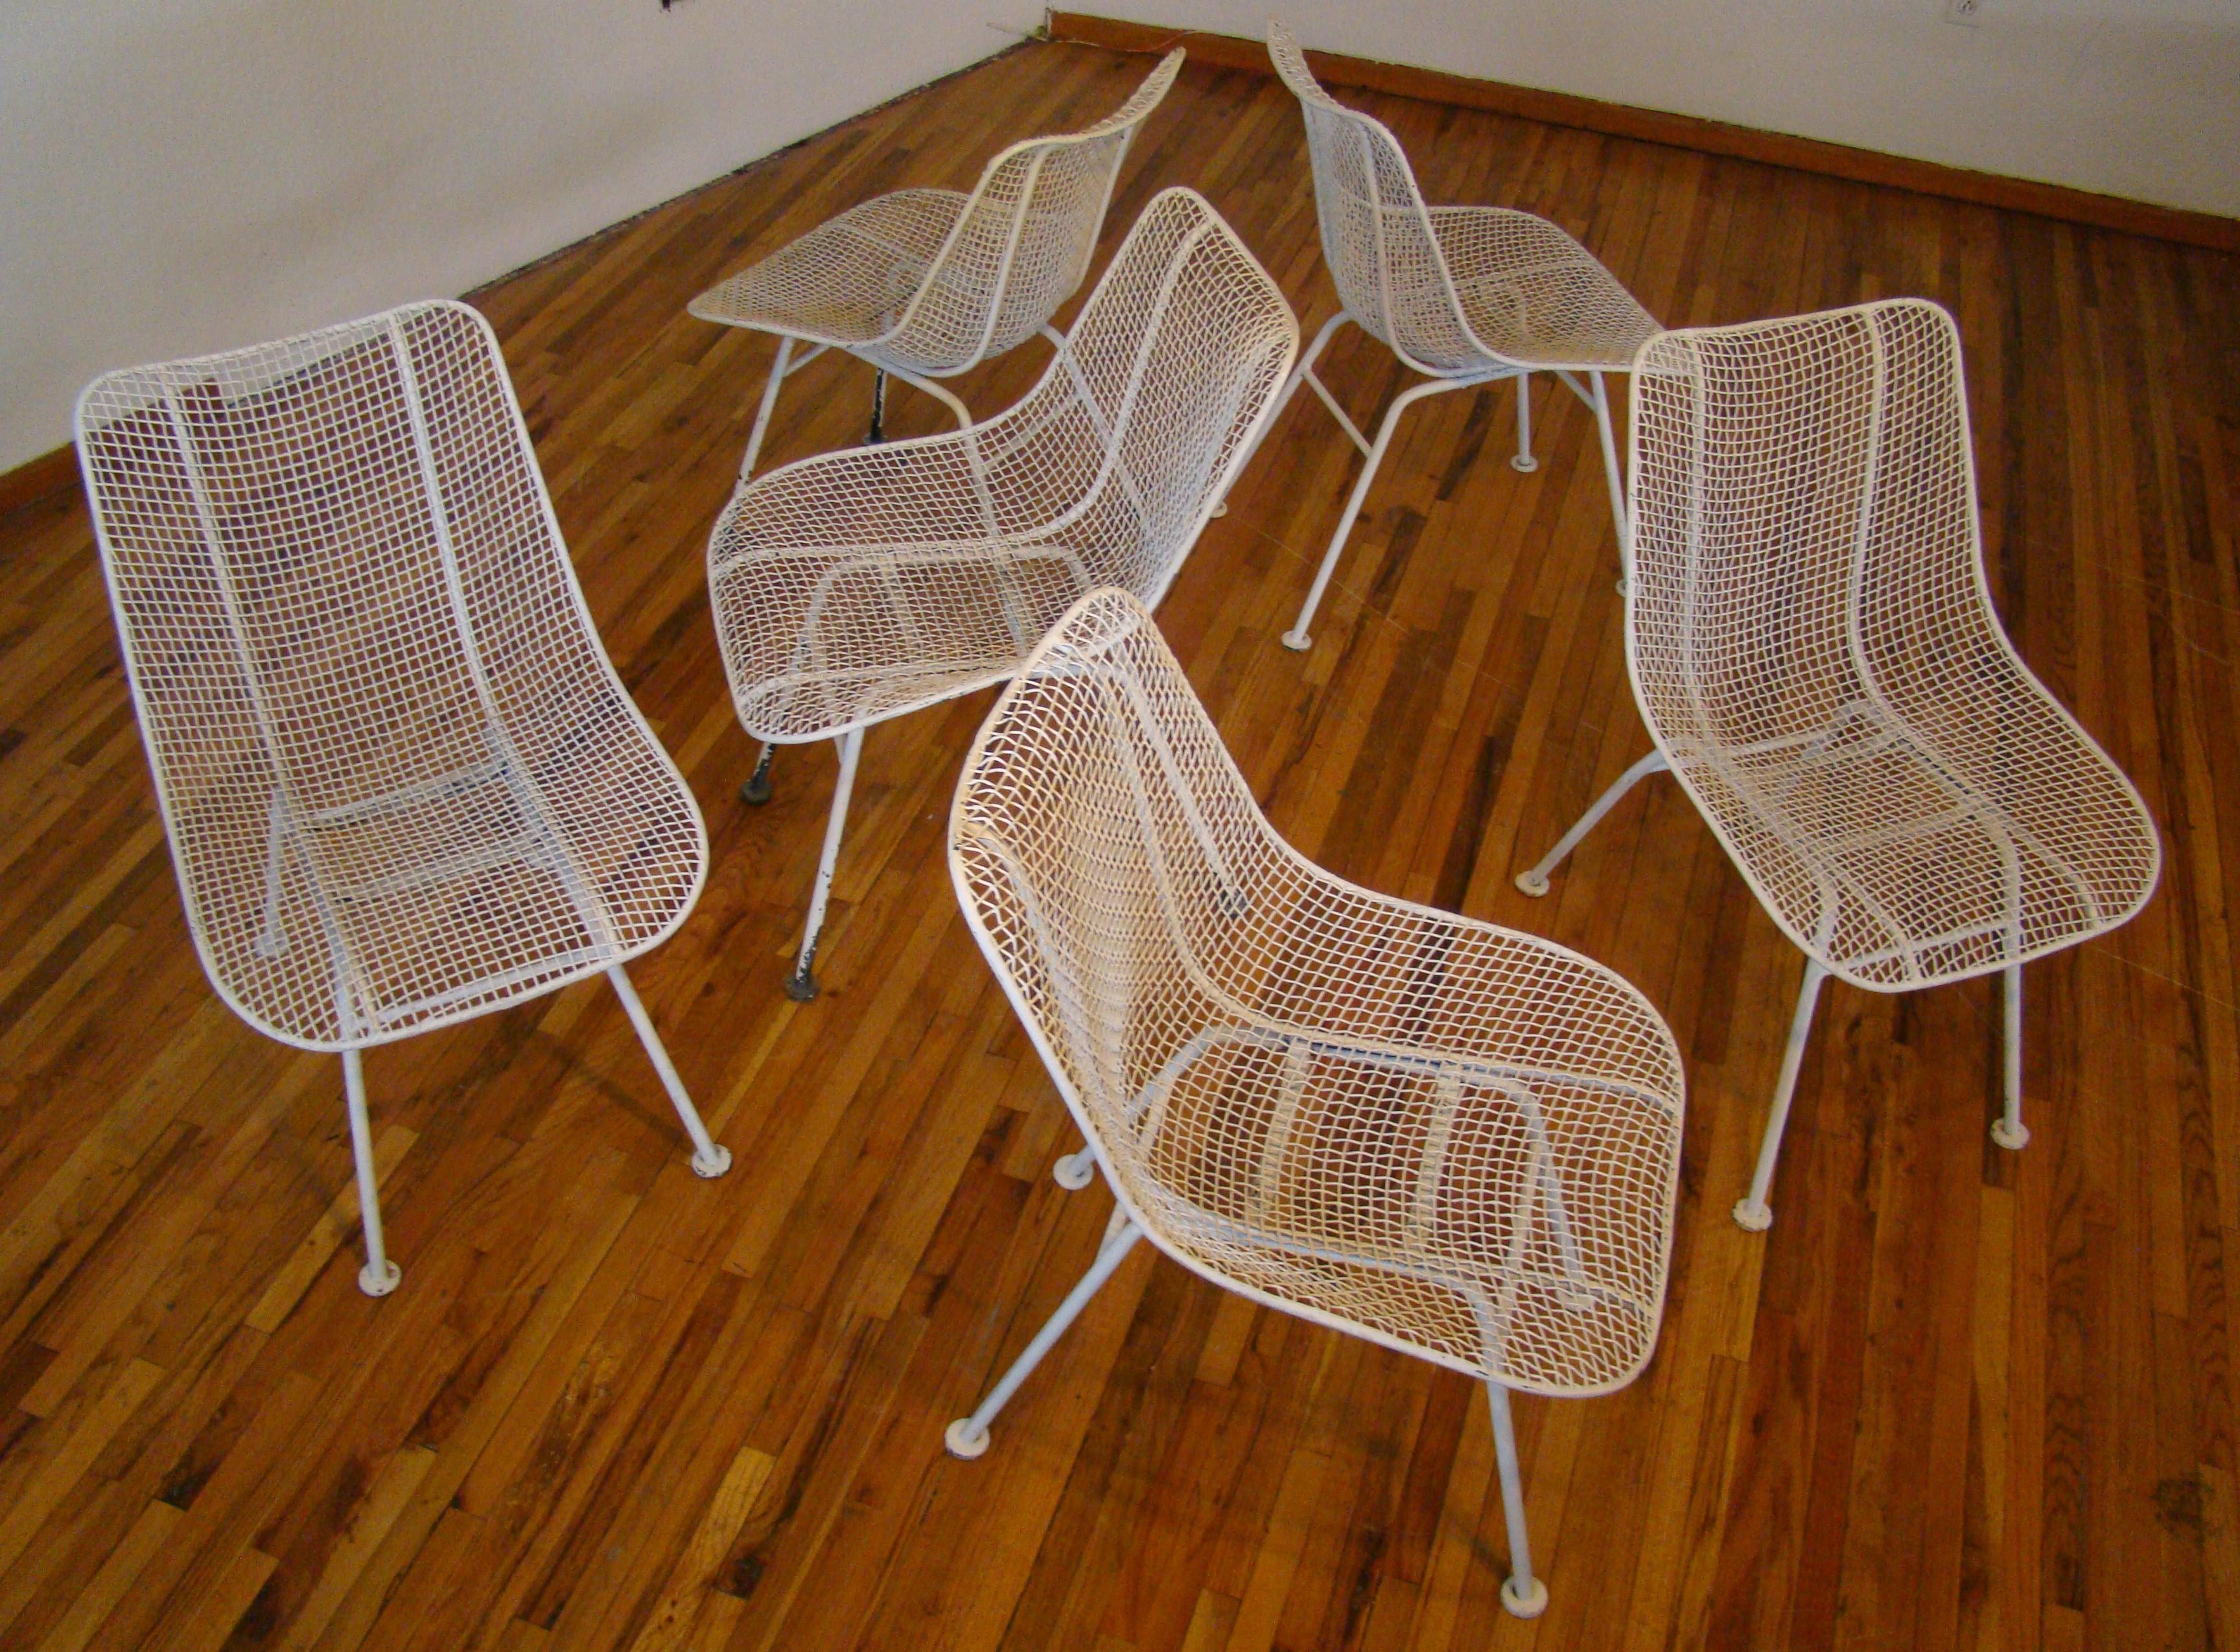 Outdoor dining chairs by Russell Woodard for Woodard Furniture, c.1950s. The side chairs are from Woodard’s “Sculptura” line designed in 1956. Each chair has a molded mesh frame that sits atop four wrought iron legs with disc feet. The chairs need